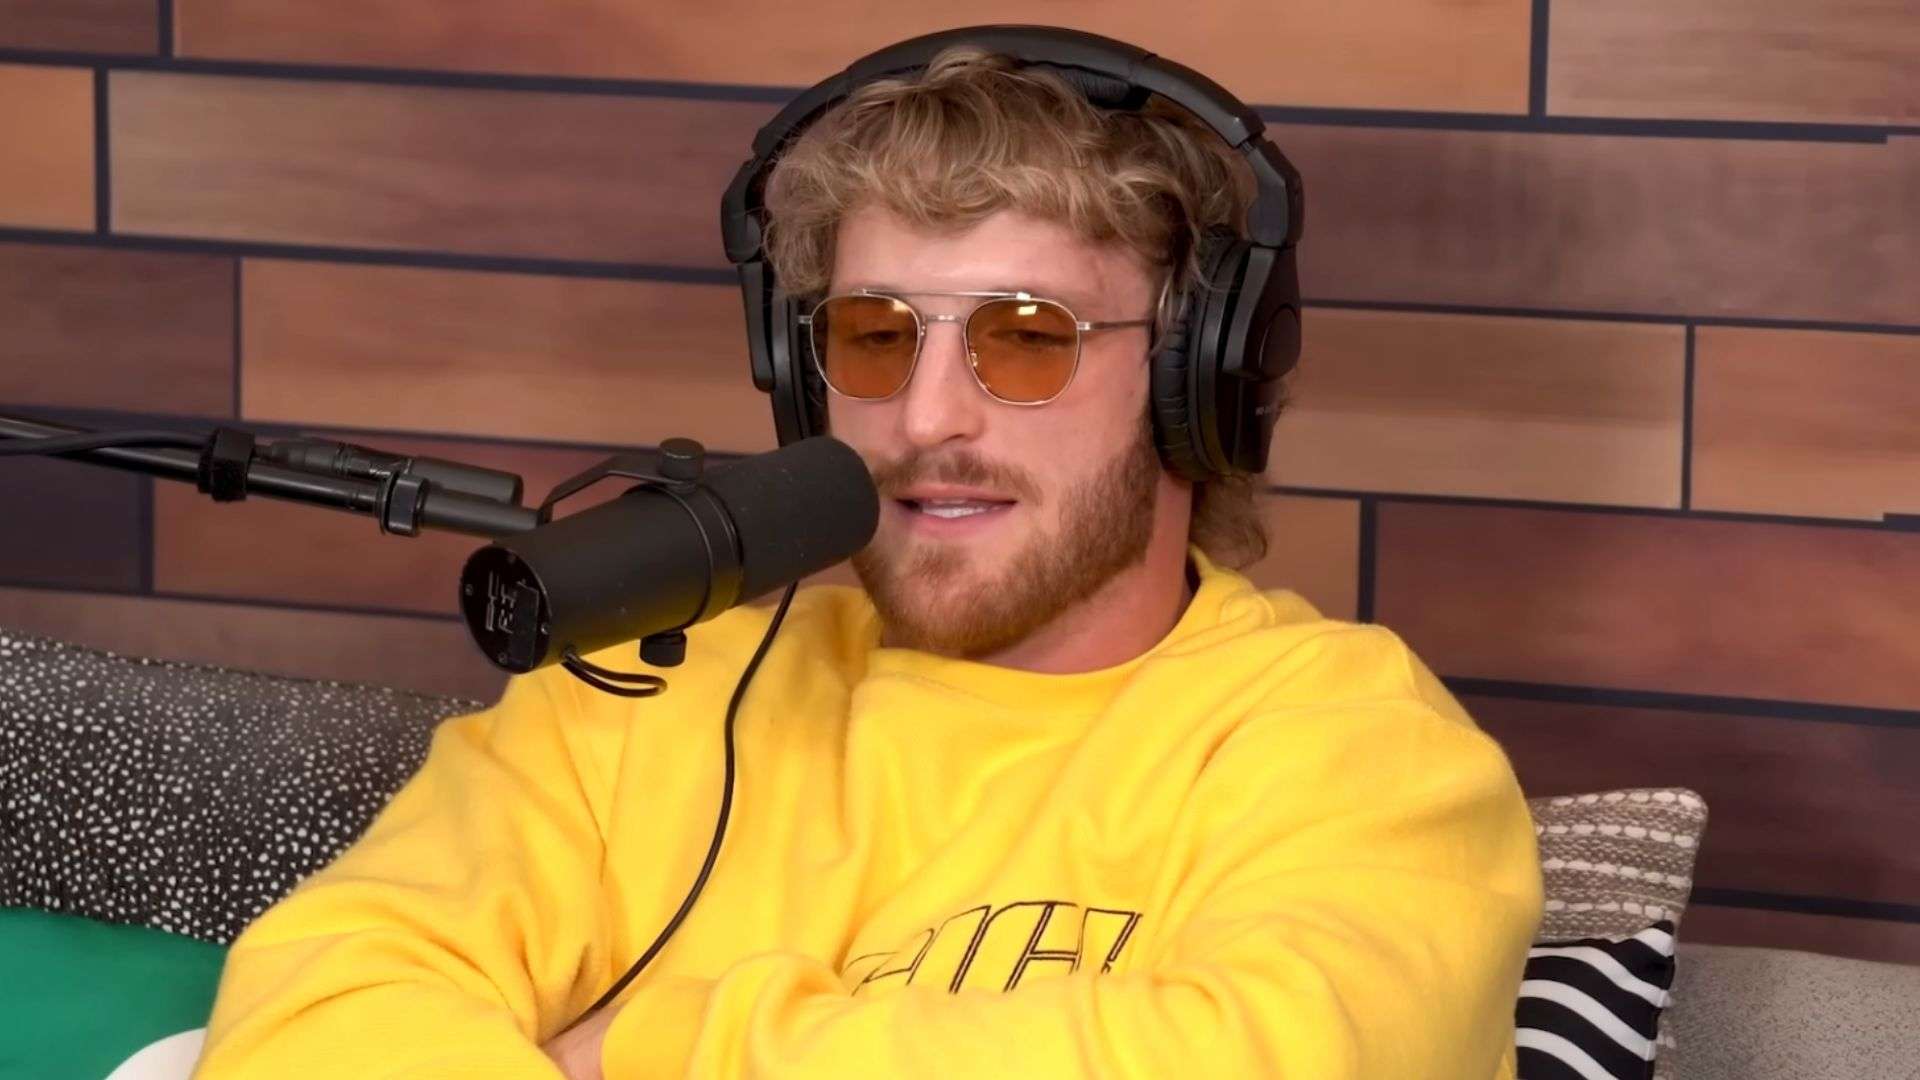 Logan Paul in yellow shirt and sunglasses talking to microphone